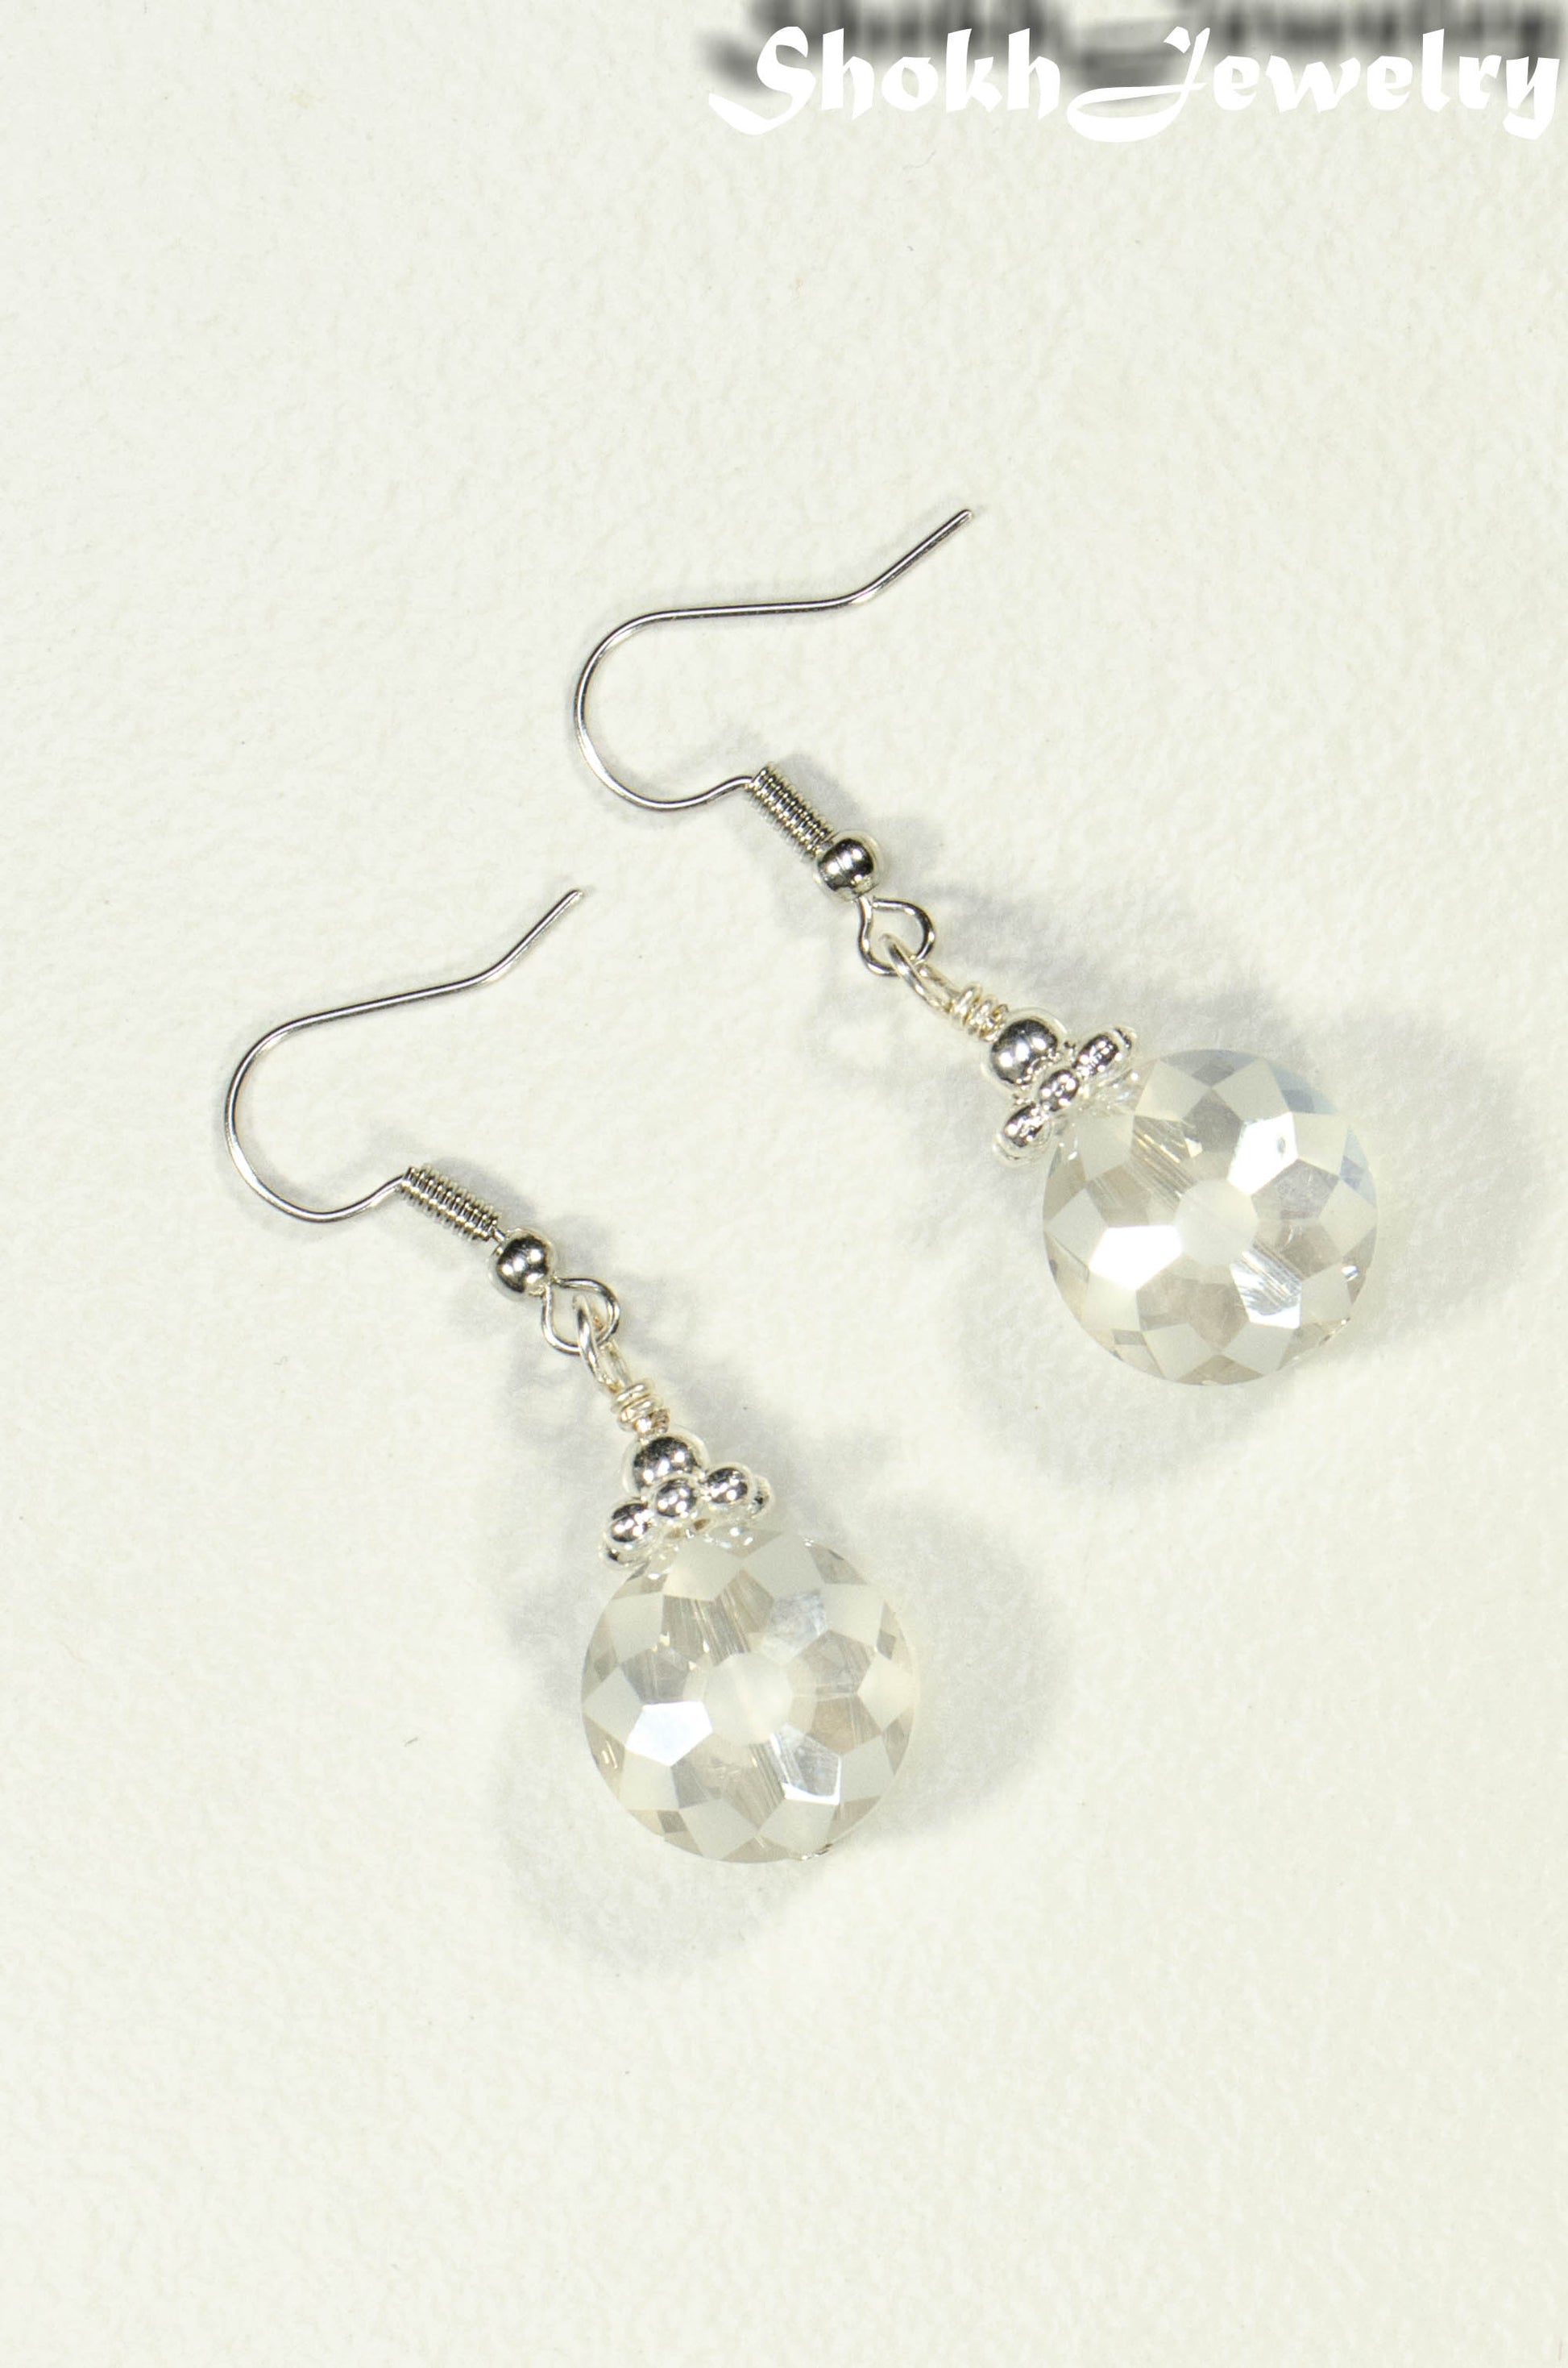 Top view of Frosted Glass Crystal Beads Earrings.